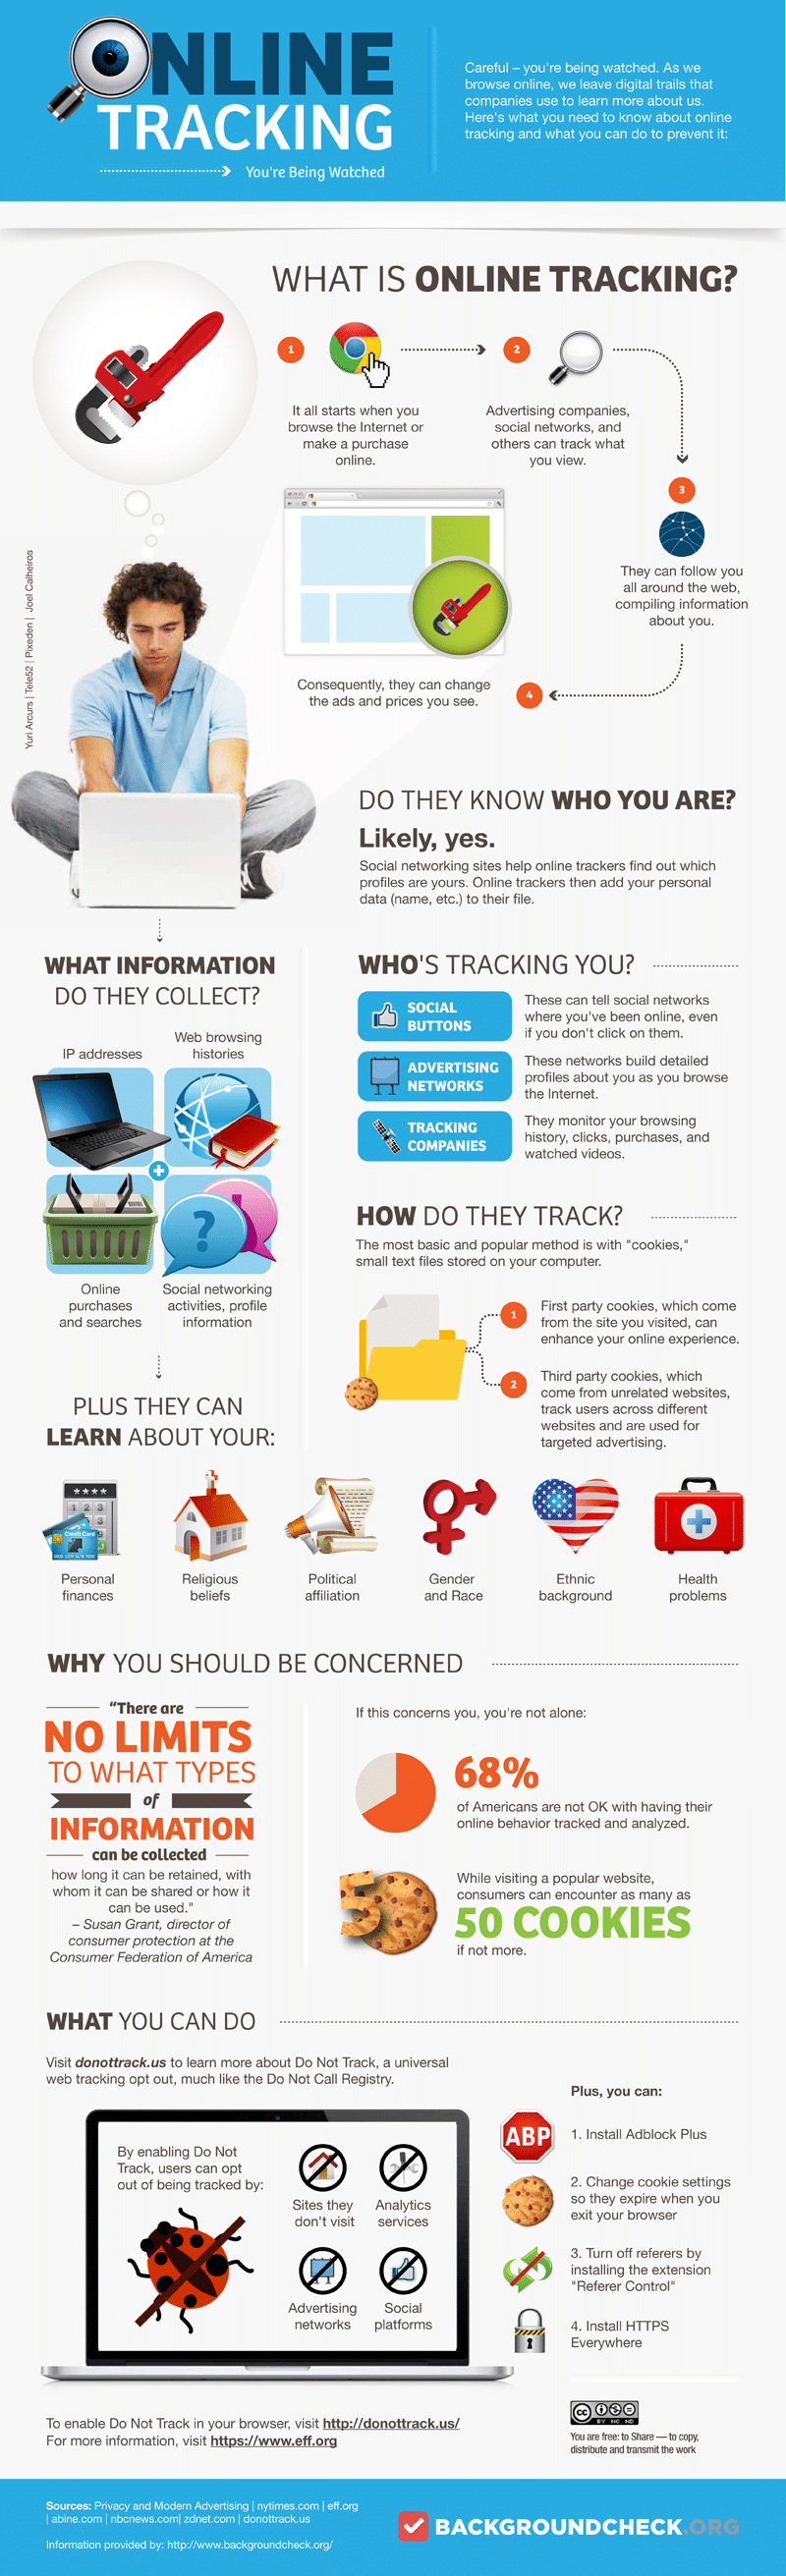 online-tracking-browsing-secrets-infographic